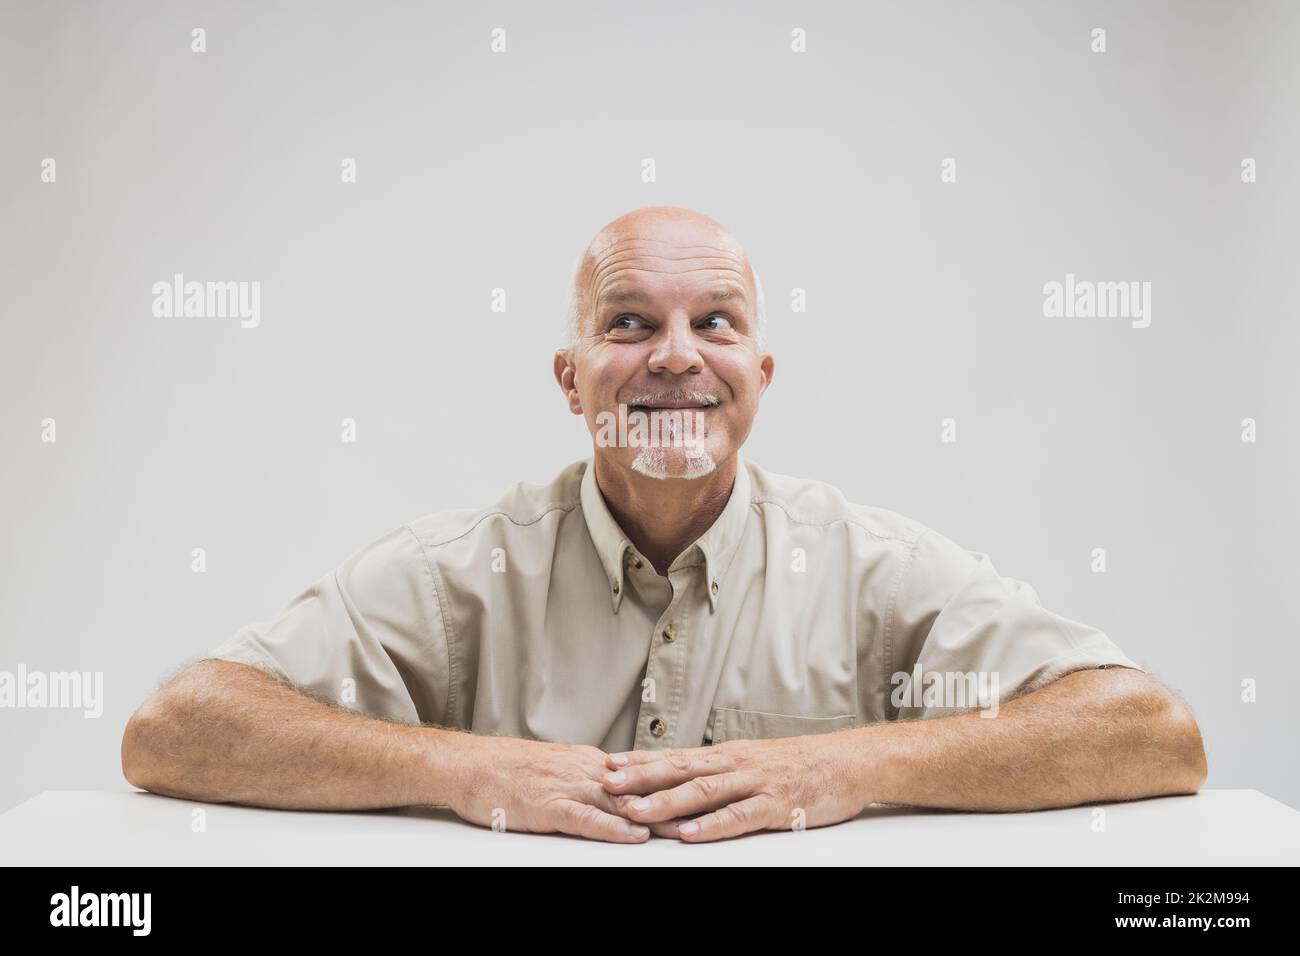 Senior man with a look of gleeful anticipation Stock Photo